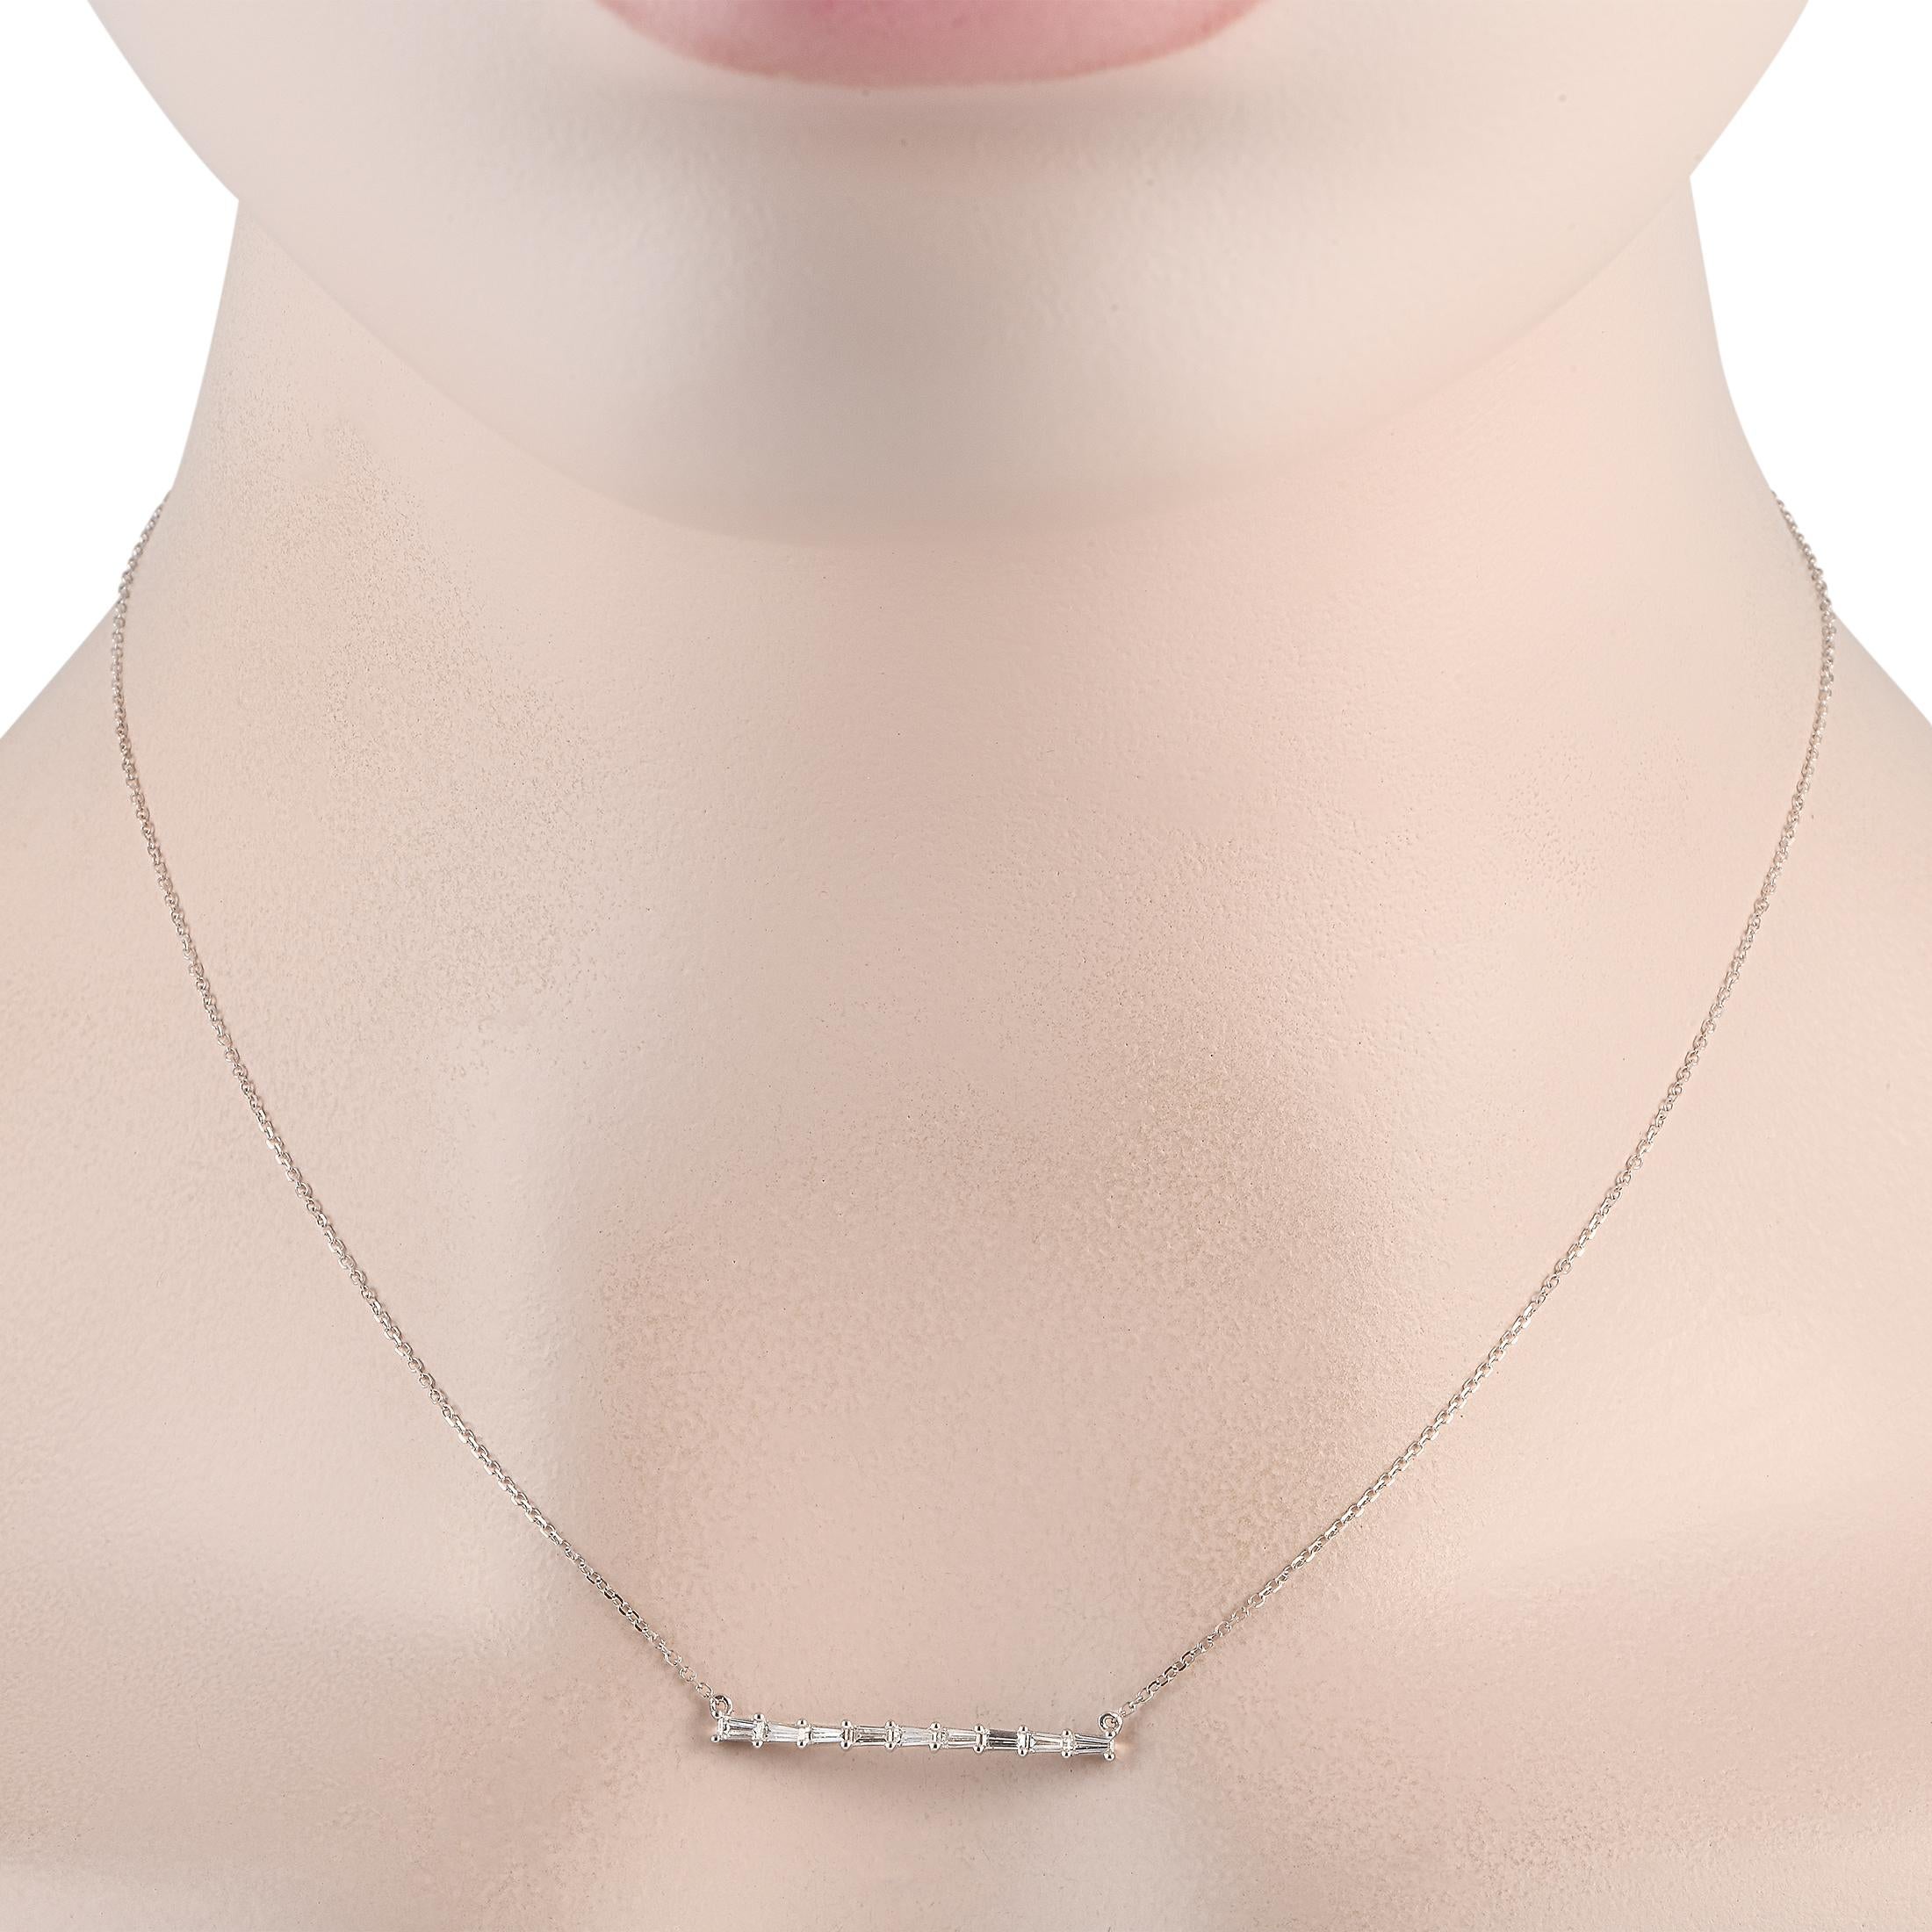 This timeless necklace is simple, elegant, and understated. The pendant – which measures 0.15” long and 1.0” wide – comes to life thanks to diamonds with a total weight of 0.33 carats. This piece is crafted from 18K White Gold and comes complete